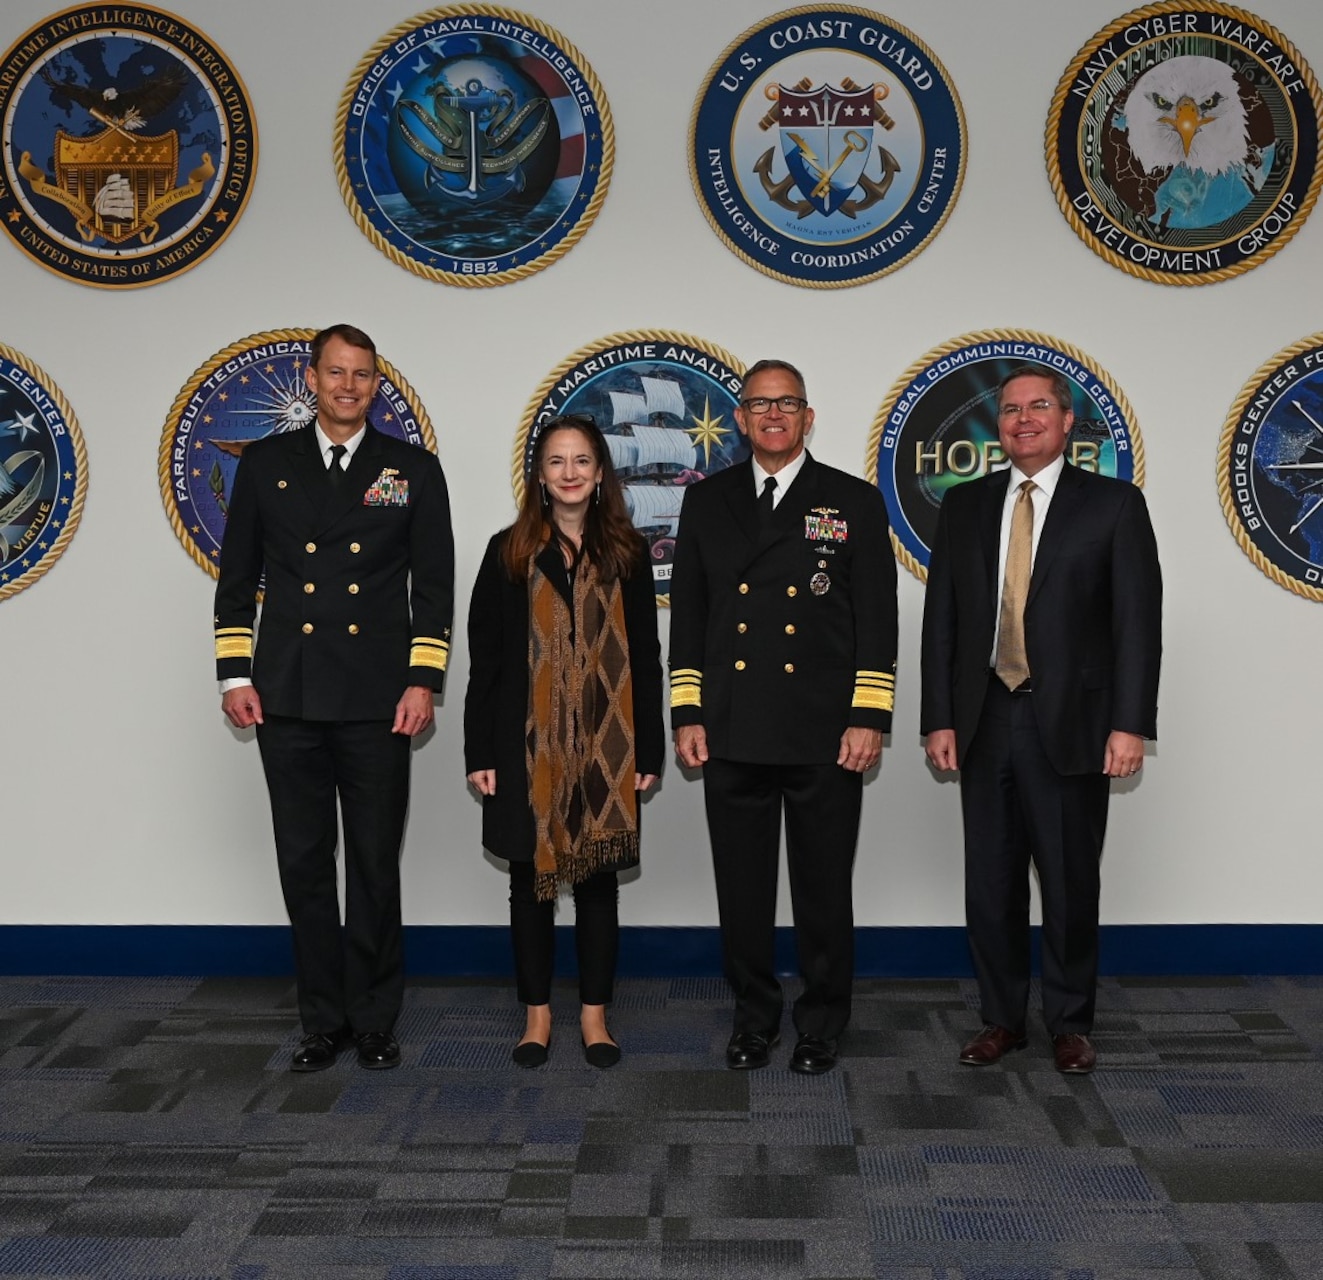 On November 23, Director of National Intelligence Avril Haines visited the National Maritime Intelligence Center to discuss critical issues in intelligence with Rear Adm. Mike Studeman, Commander of the Office of Naval Intelligence (ONI).